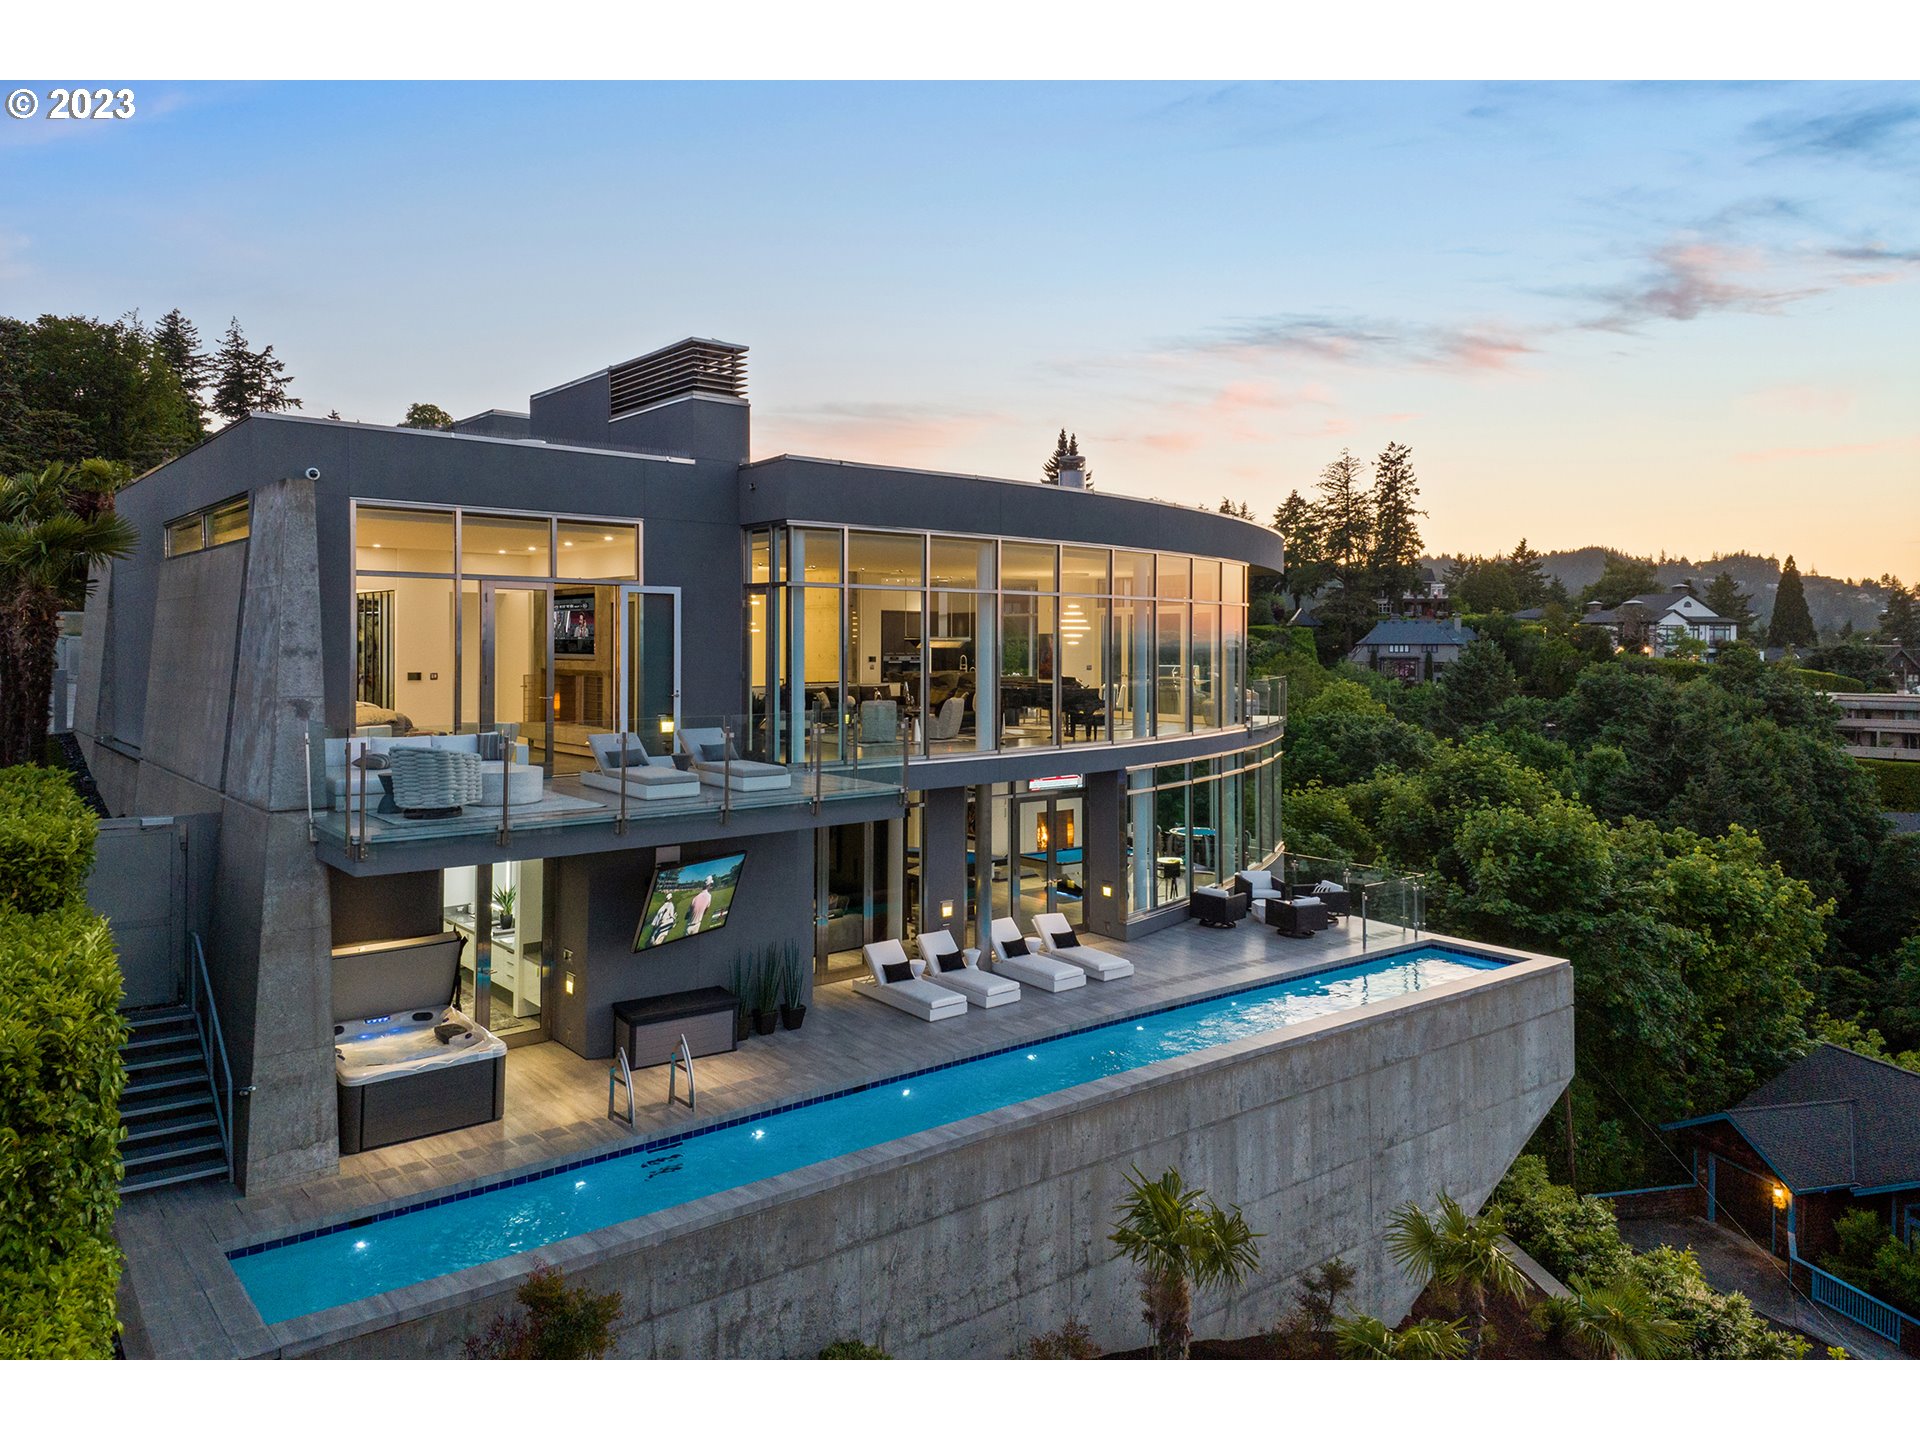 Ultra-Modern, private, gated sophisticate that is beyond the imagination. Since the last time this home was on the market over $1.7M has been invested and the price has been reduced by $1M..So, opportunity is knocking, you will want to own one of Portland's most iconic domiciles. This is truly one of one. Walls of glass bring the 270-degree views of the city, river, mountains and beyond to you. This showpiece encompasses elements not found in this marketplace. German engineered stainless steel front door and window package, imported stone slabs, imported Italian stone floors throughout the interior, exterior and surrounding the pool; custom designed elements that can be found nowhere else;  3BR 3.1 baths with a main floor Owner's Suite; elevator, gourmet kitchen, full bar, all new audio and AV throughout, media room with 140 inch screen, world class gym, guest suite, game area, state of the art LED lit wine cellar, pool bath with steam and sauna, full lap pool hanging over the city and 3-vehicle garage. This type of residence is something that rarely comes available and will stand the test of time in quality, style and functionality. Located just 2 minutes from downtown Portland and freeways. Over time over $15M has been invested in this home.